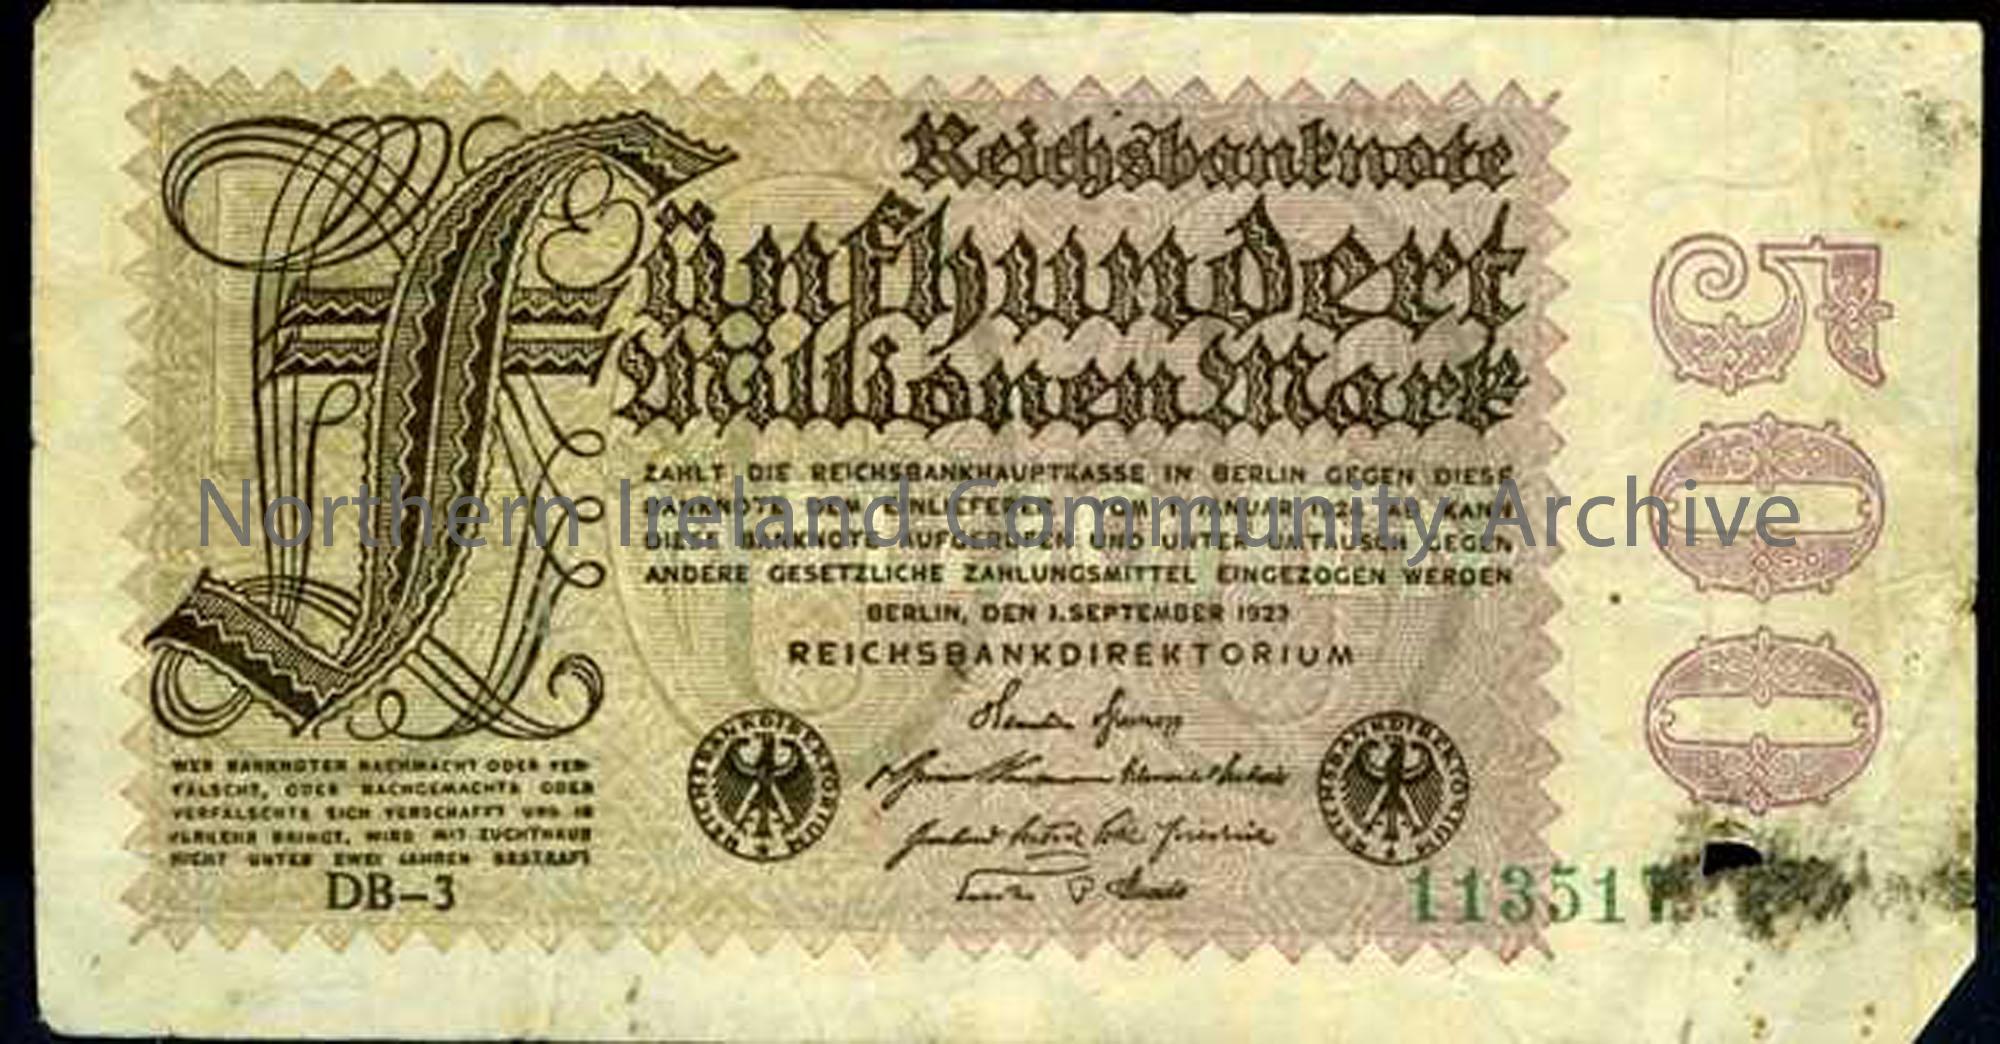 German bank note for 500 marks